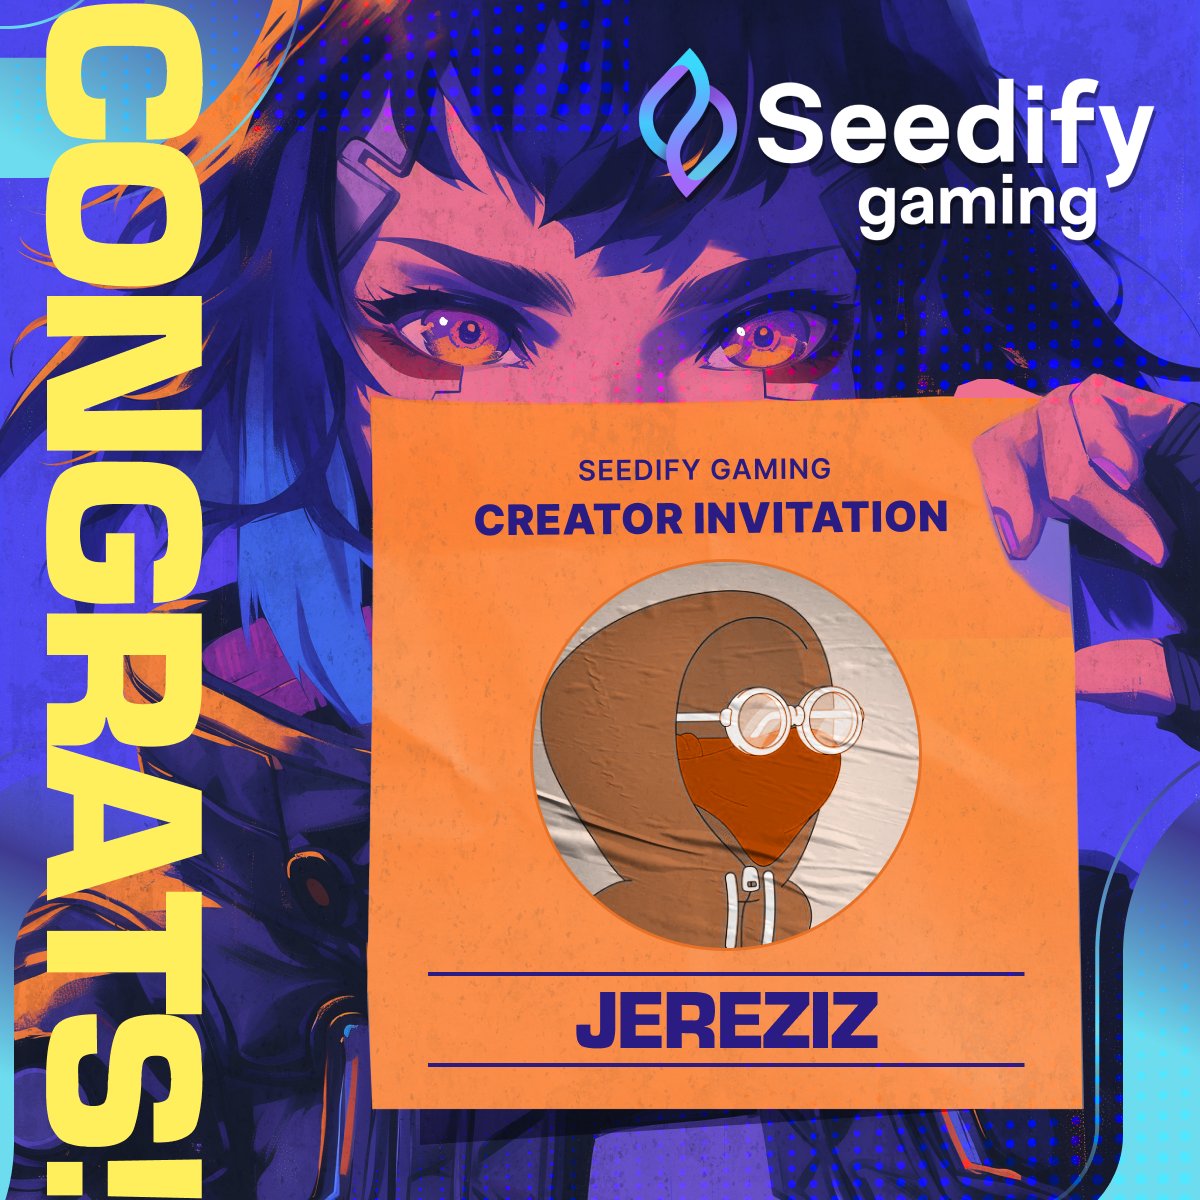 I'm thrilled to announce that @SeedifyFund has invited me to join their creator program Rewards such as: -KOL Allocation investments - Stablecoins - NFT Whitelist allocation $SFUND #SeedifyGamingCreator